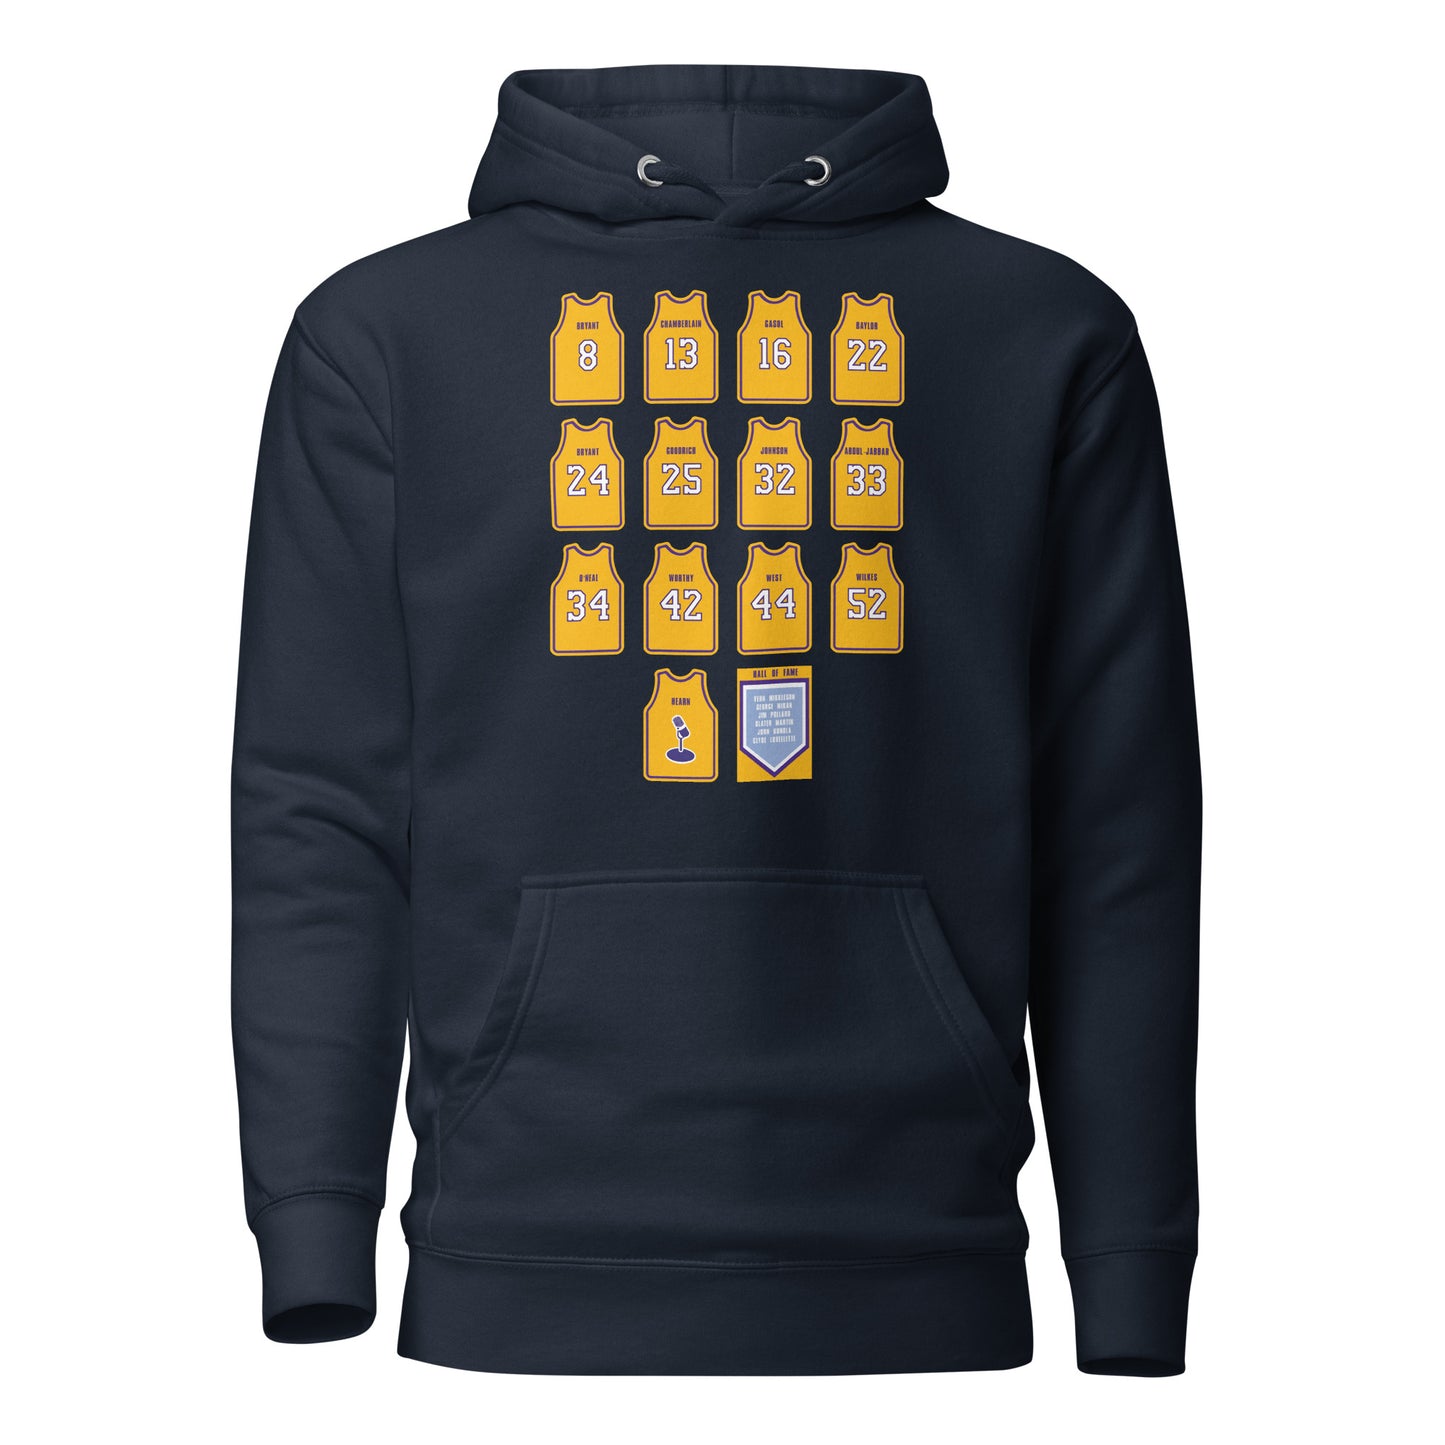 Los Angeles Lakers Retired Jerseys Illustrated Pullover Hoodie